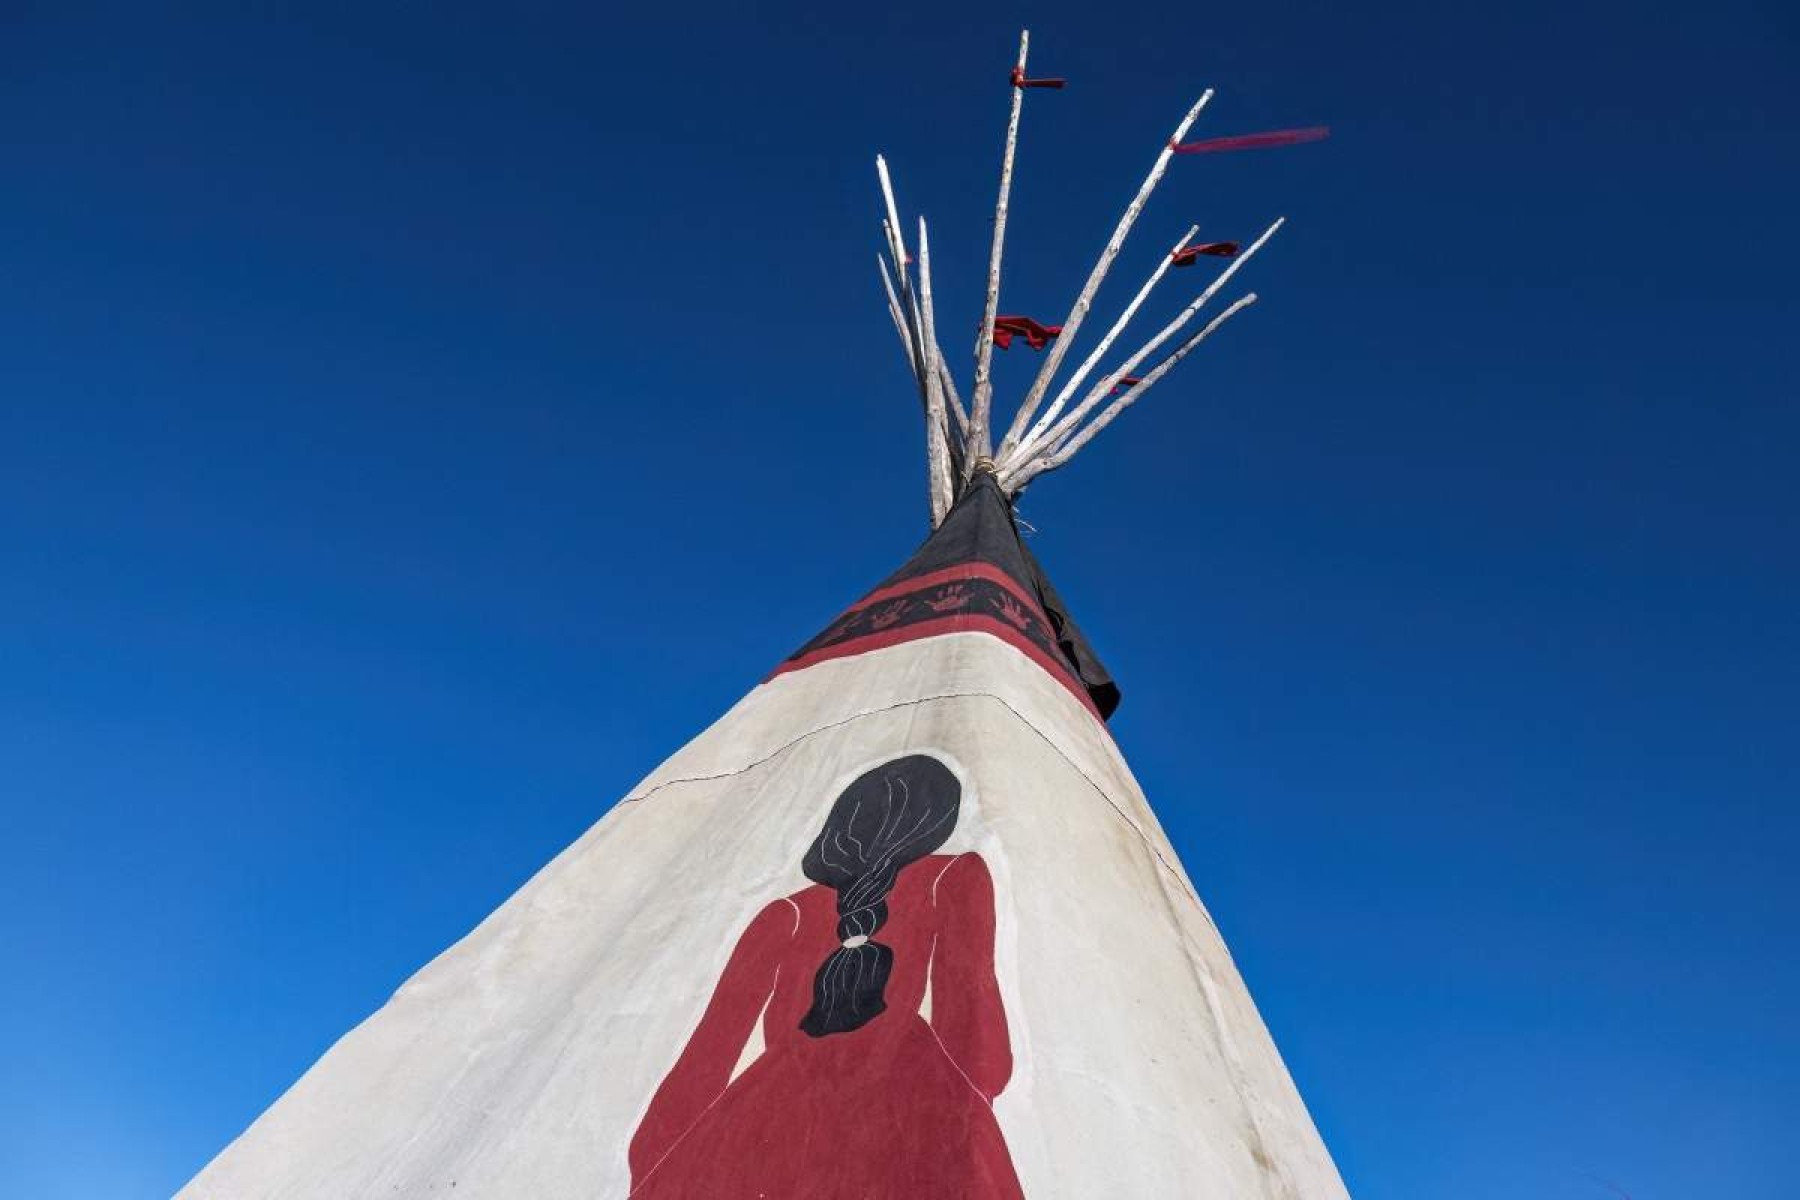  A ceremonial tepee is set up in honor of slain Morgan Harris and other Missing and Murdered Indigenous Women, at 